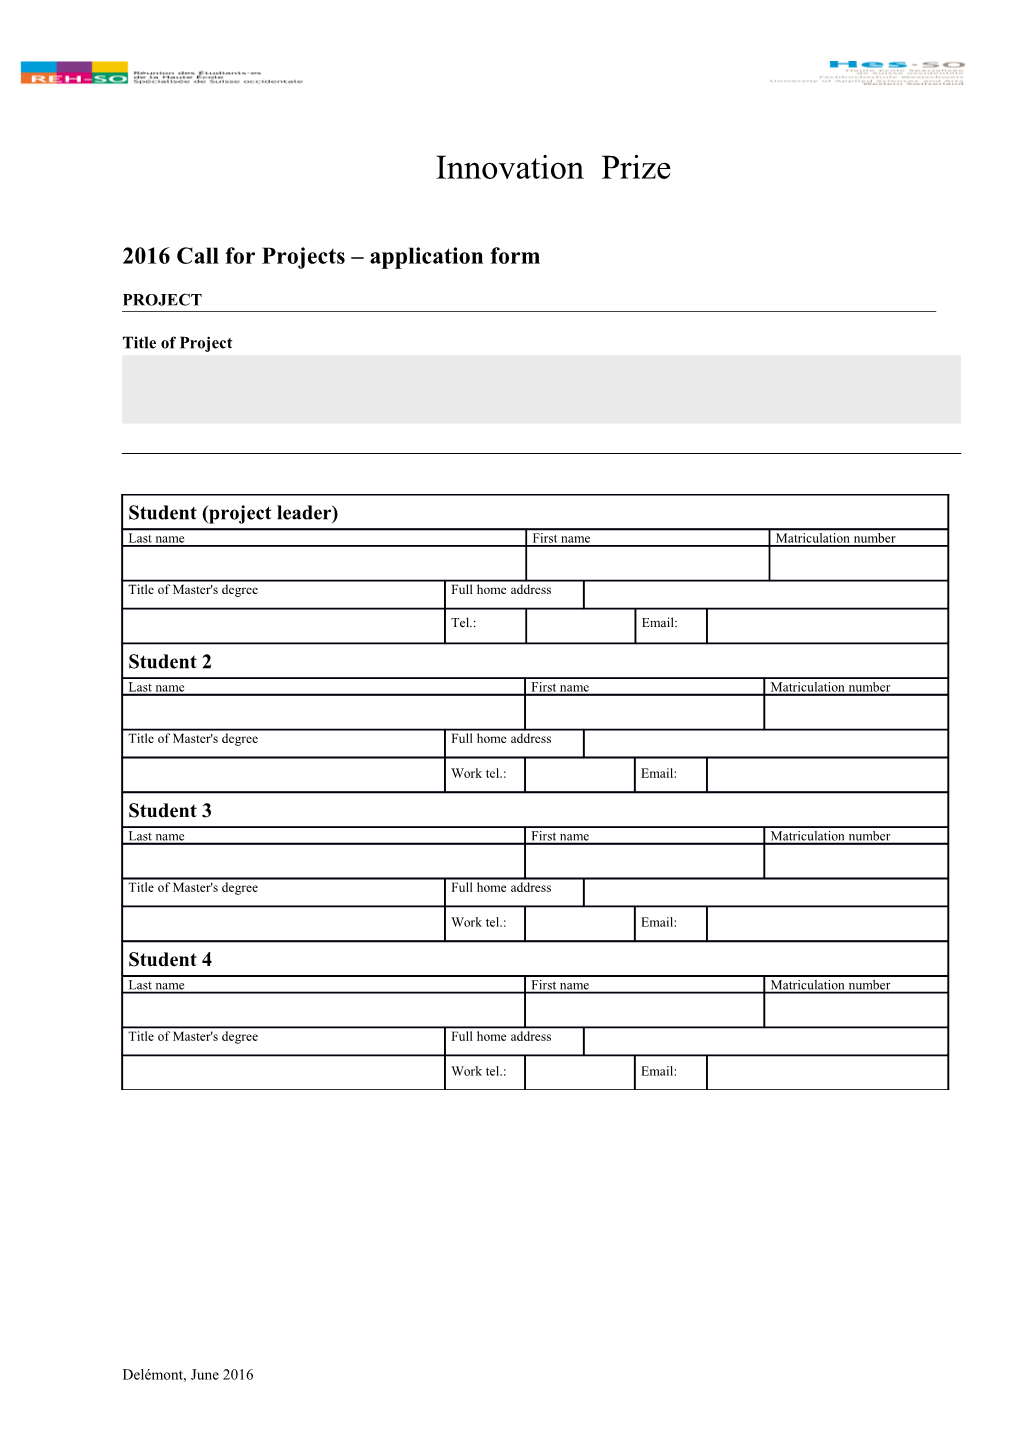 2016 Call for Projects Application Form